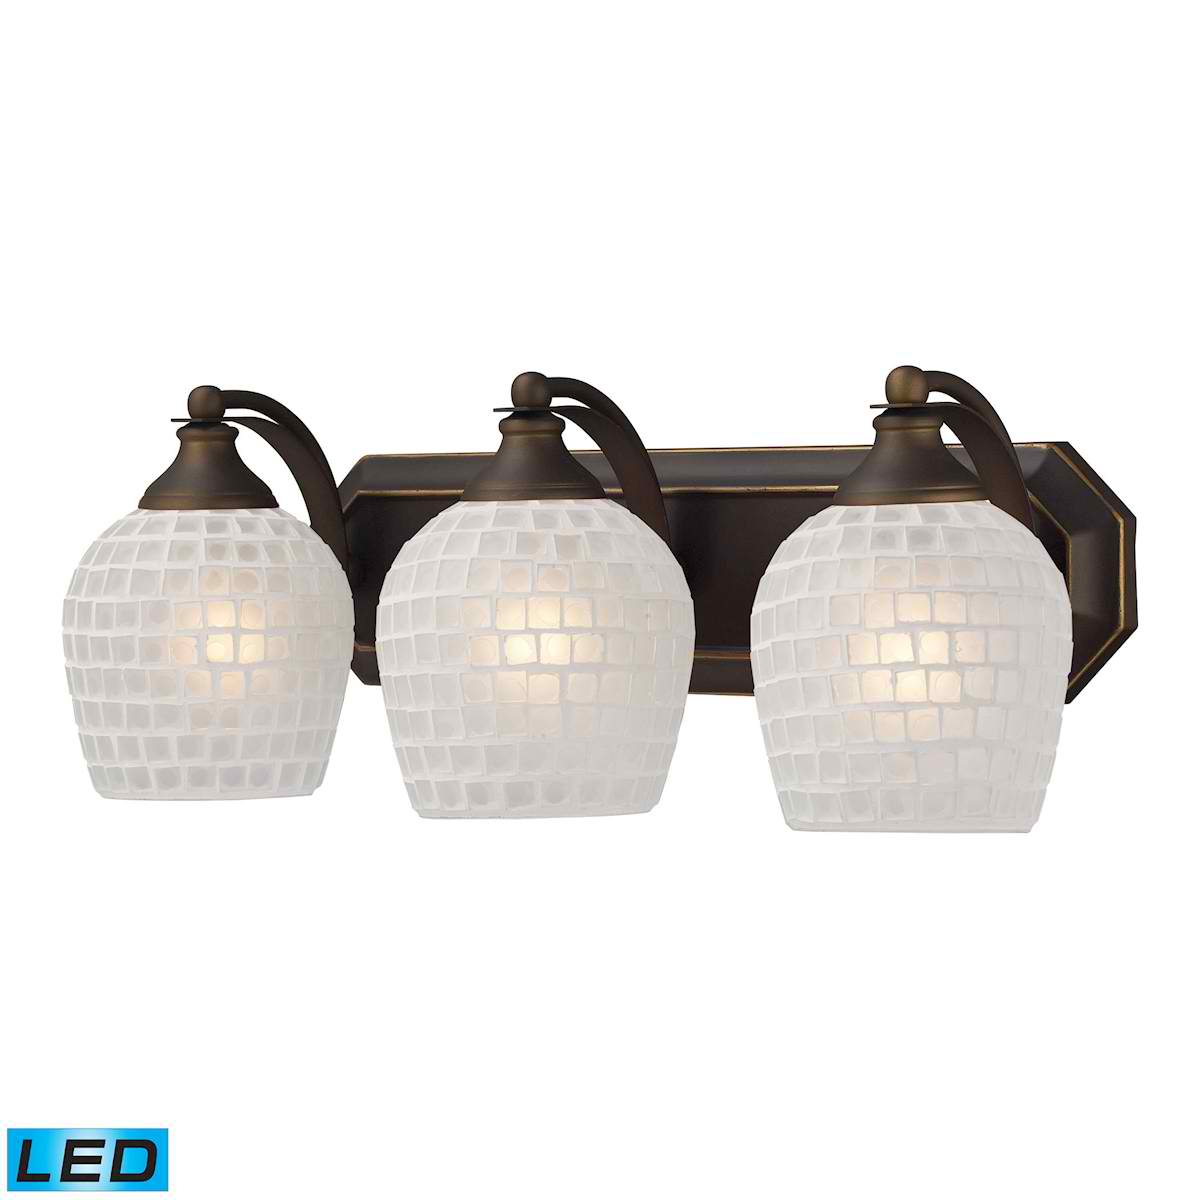 3 Light Vanity in Aged Bronze and White Mosaic Glass - LED, 800 Lumens (2400 Lumens Total) with Full Scale